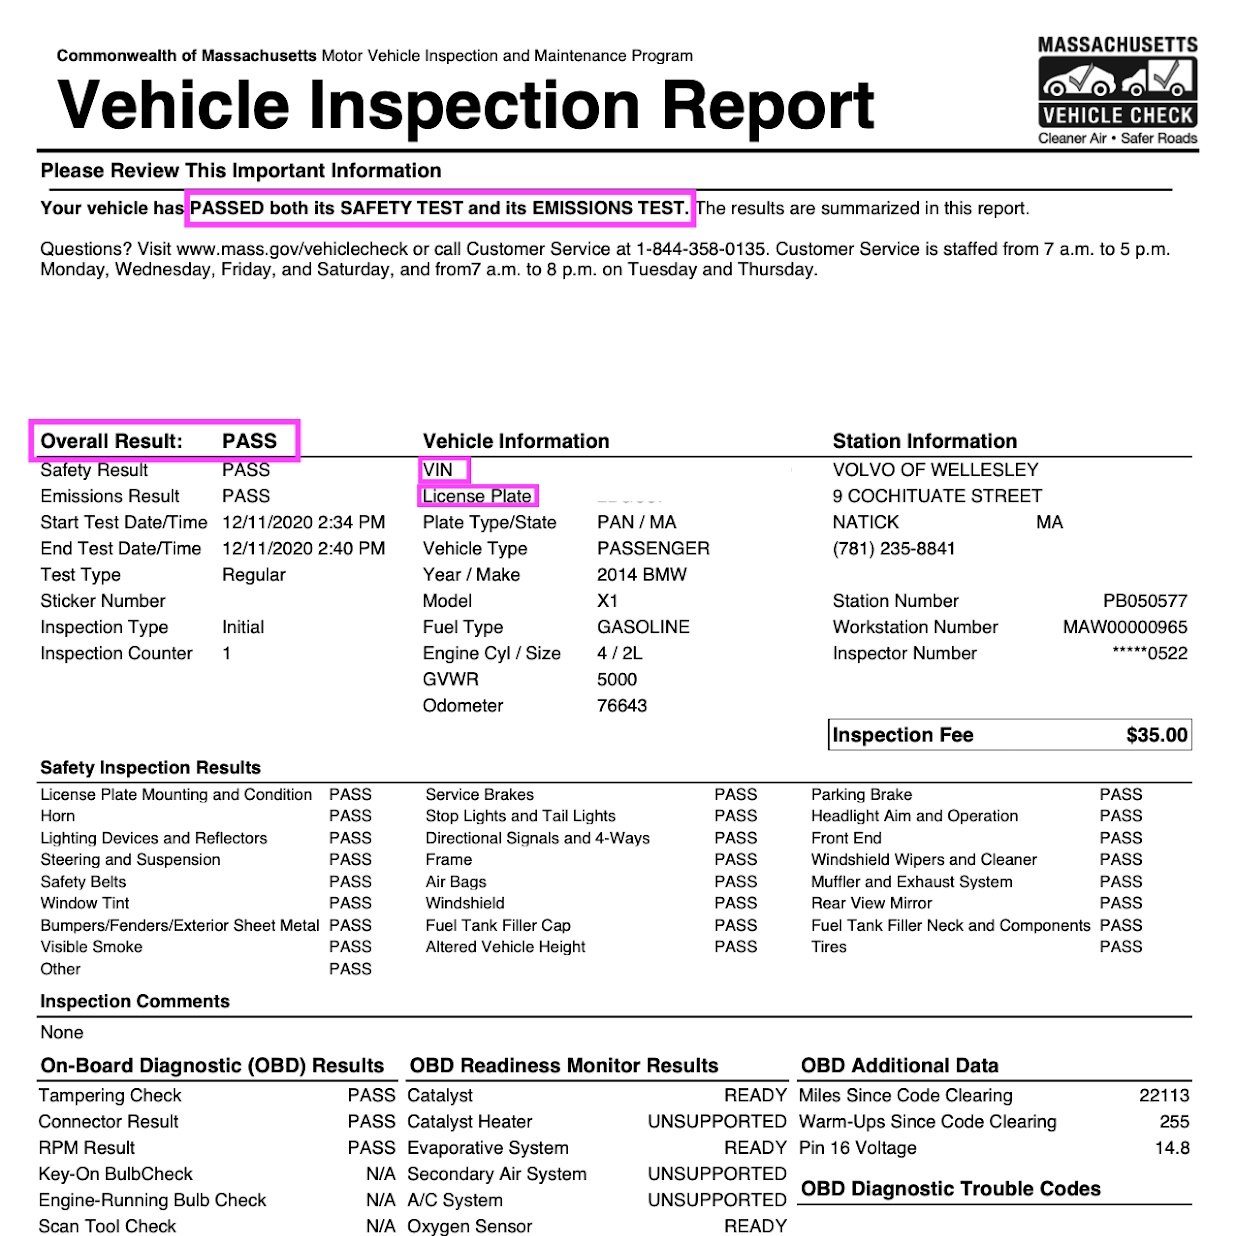 Find and Print Your Vehicle Inspection Report